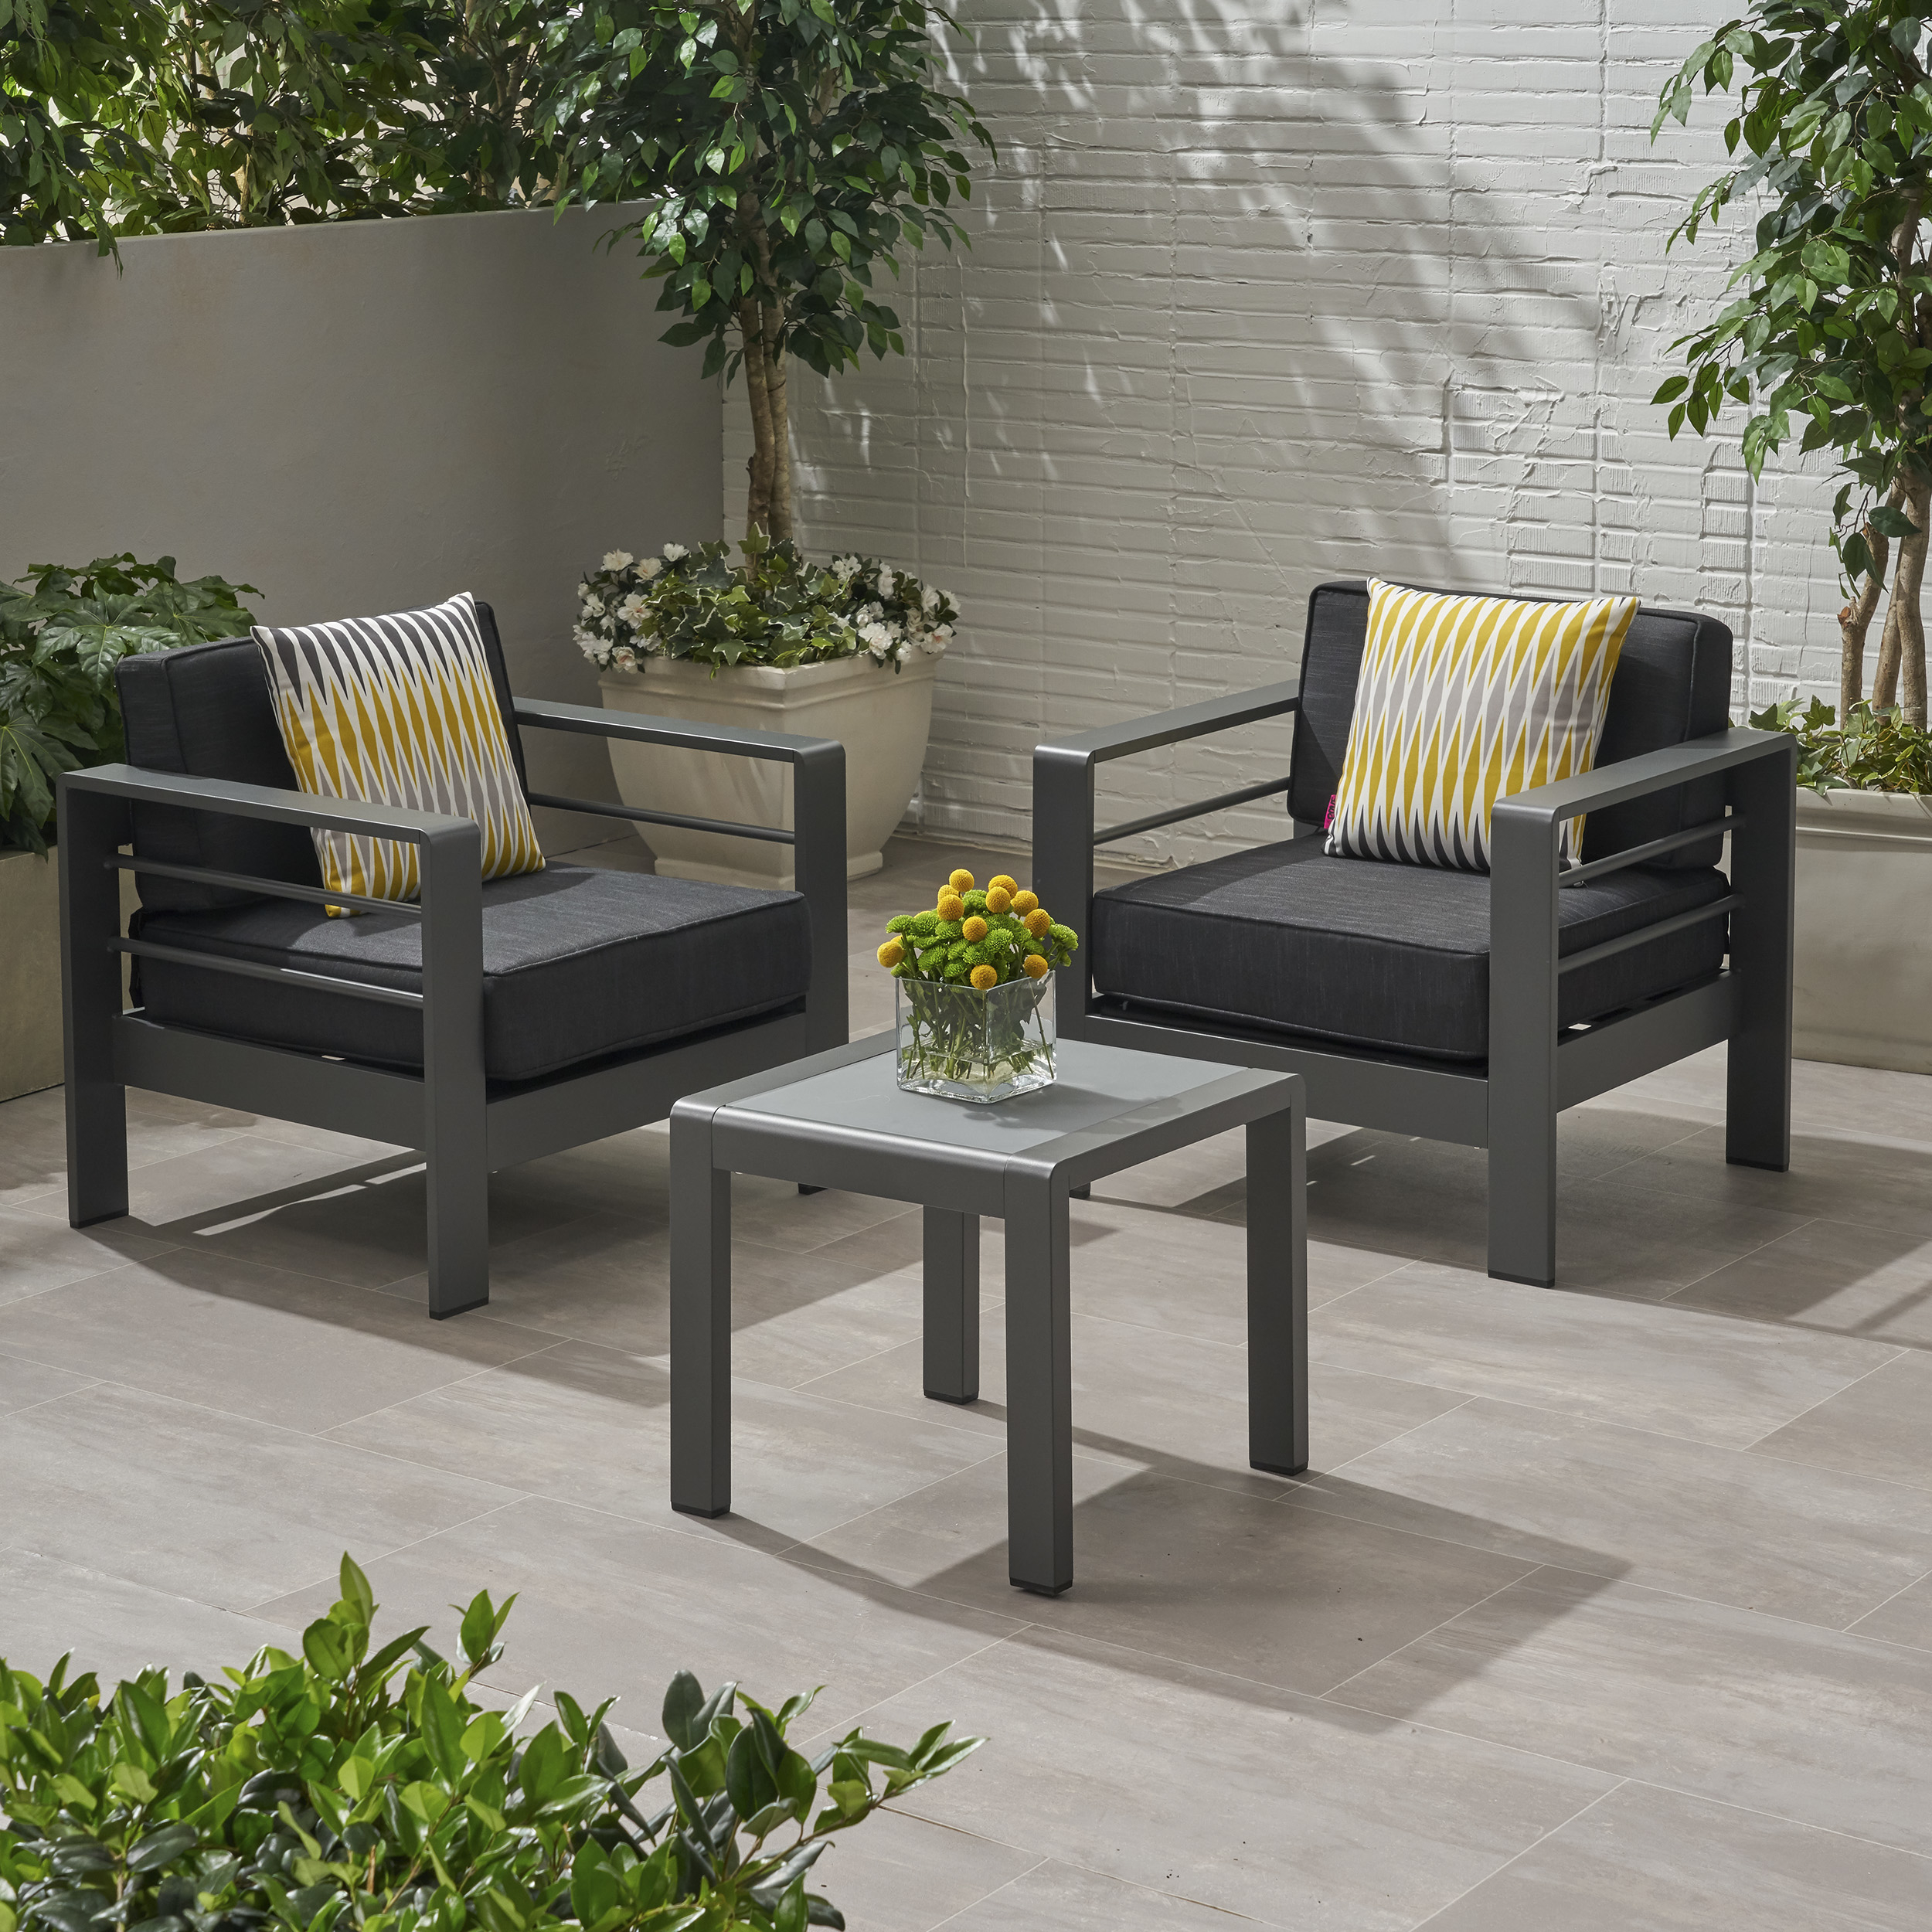 Shirley Coral Outdoor 2 Seater Club Chair And Table Set - Gray, Dark Gray